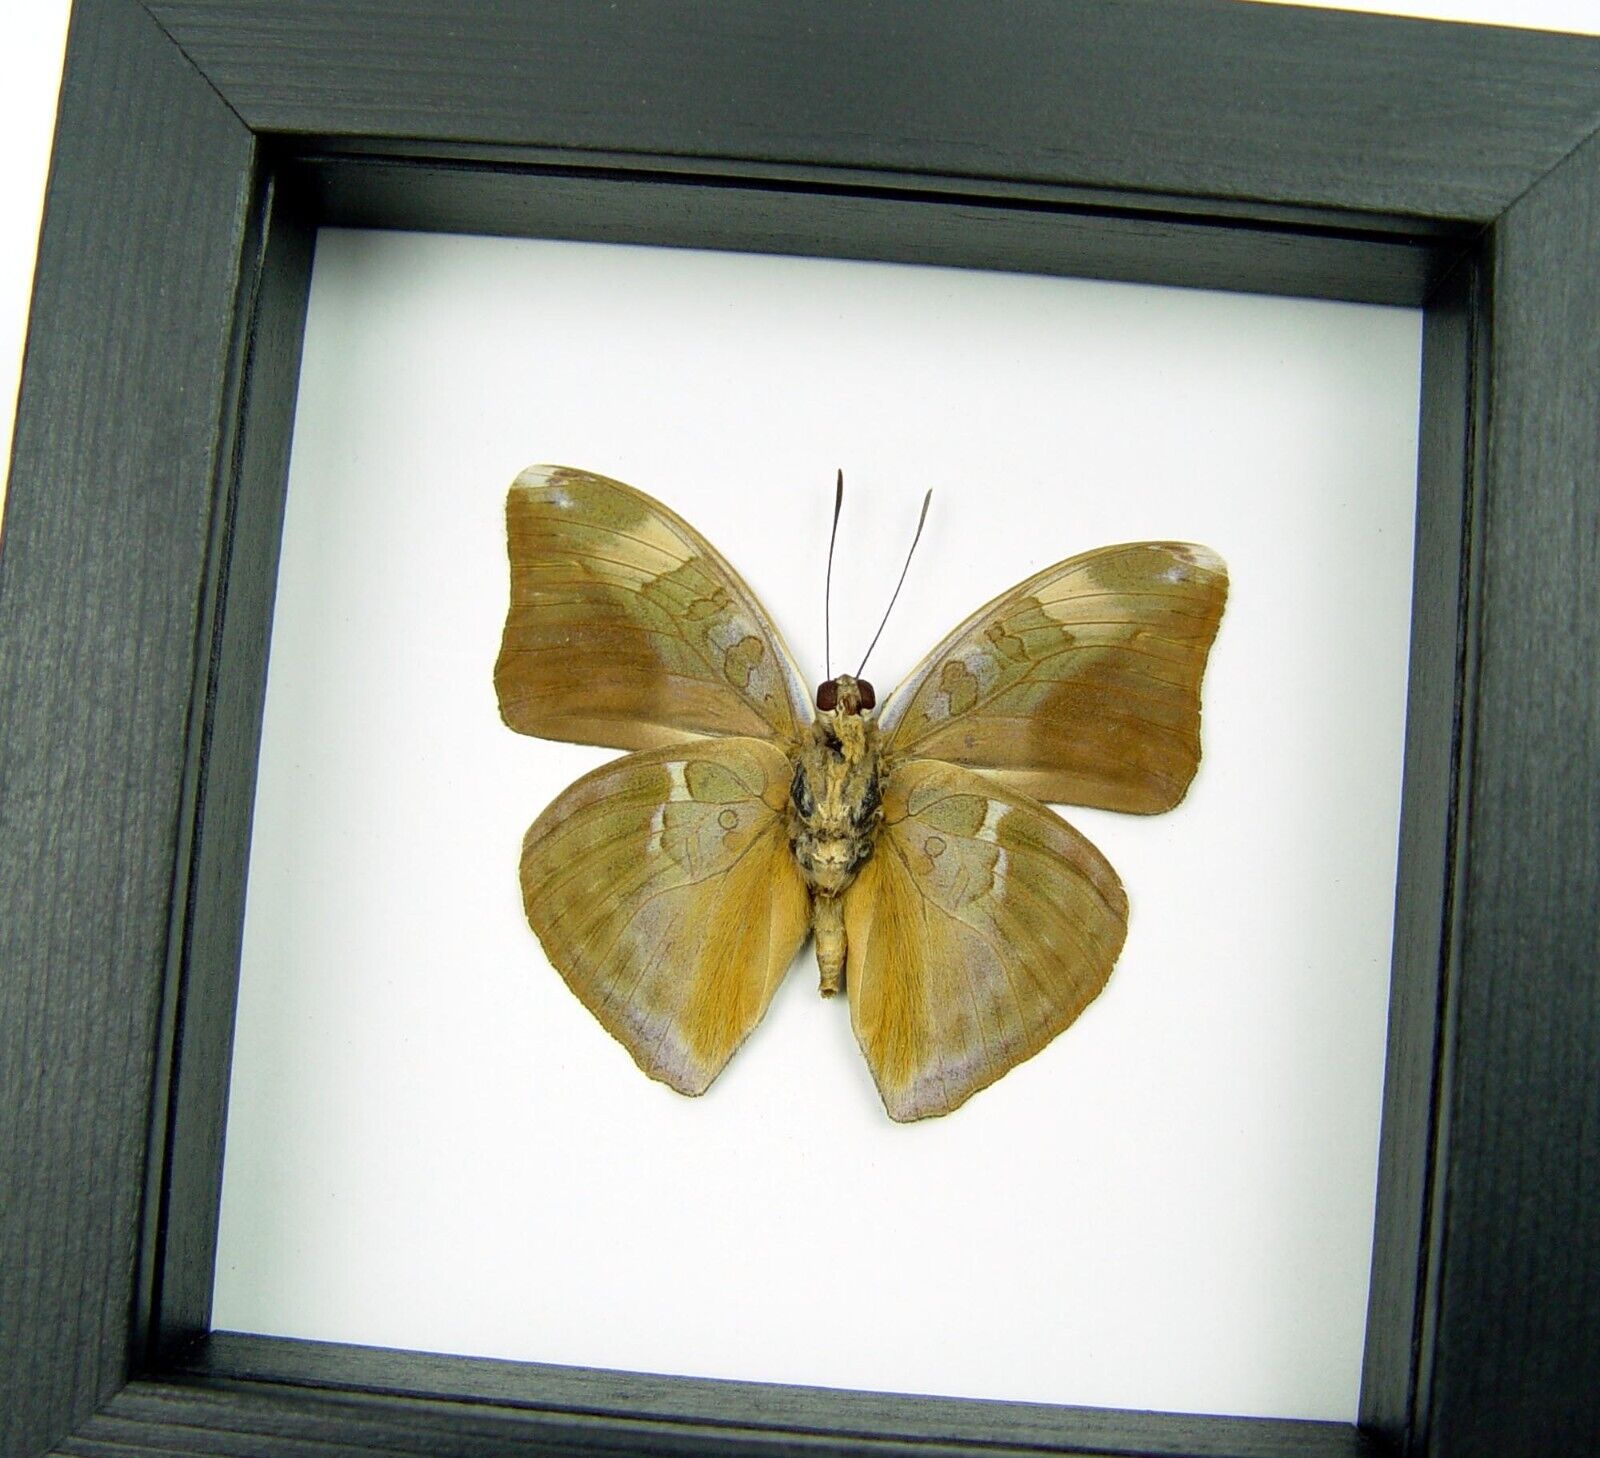 Framed Butterfly Bebearia species verso Green Leaf Mimic Classic Black Display